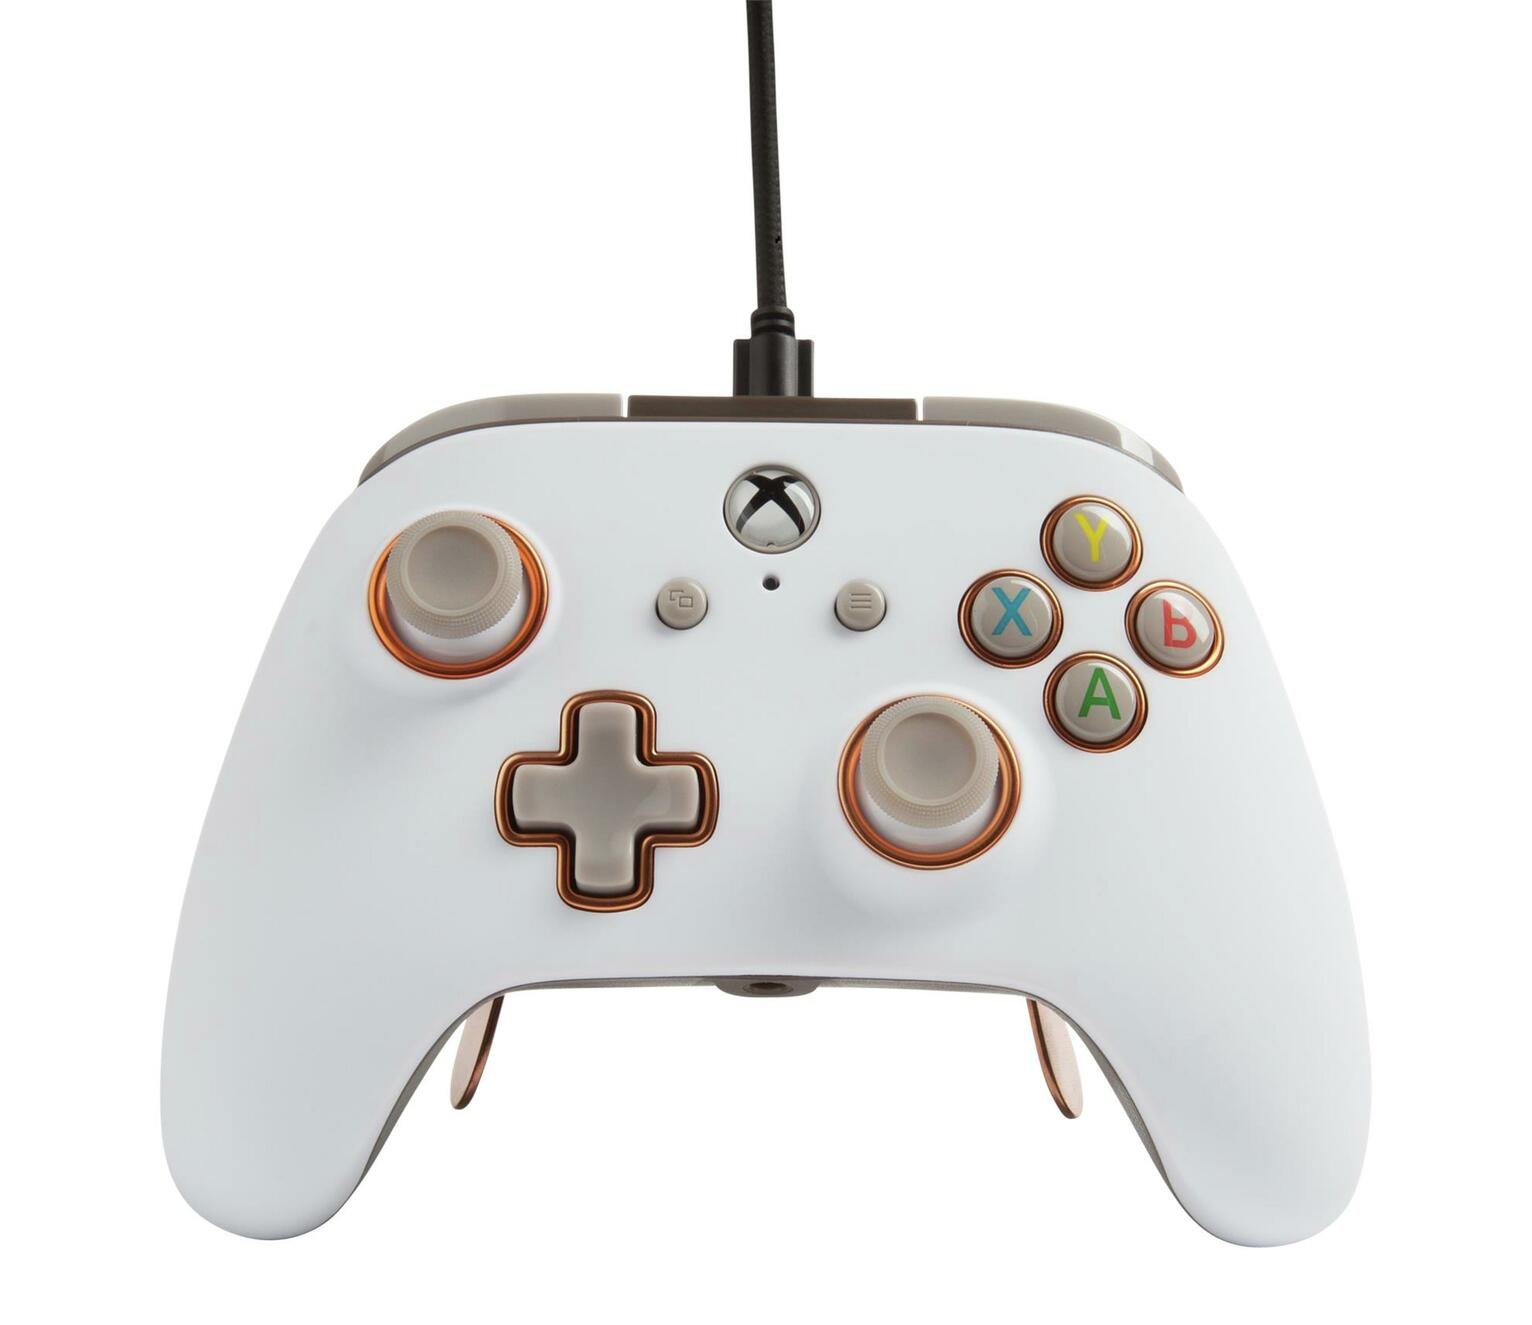 Fusion Pro Wired Controller for Xbox One - White